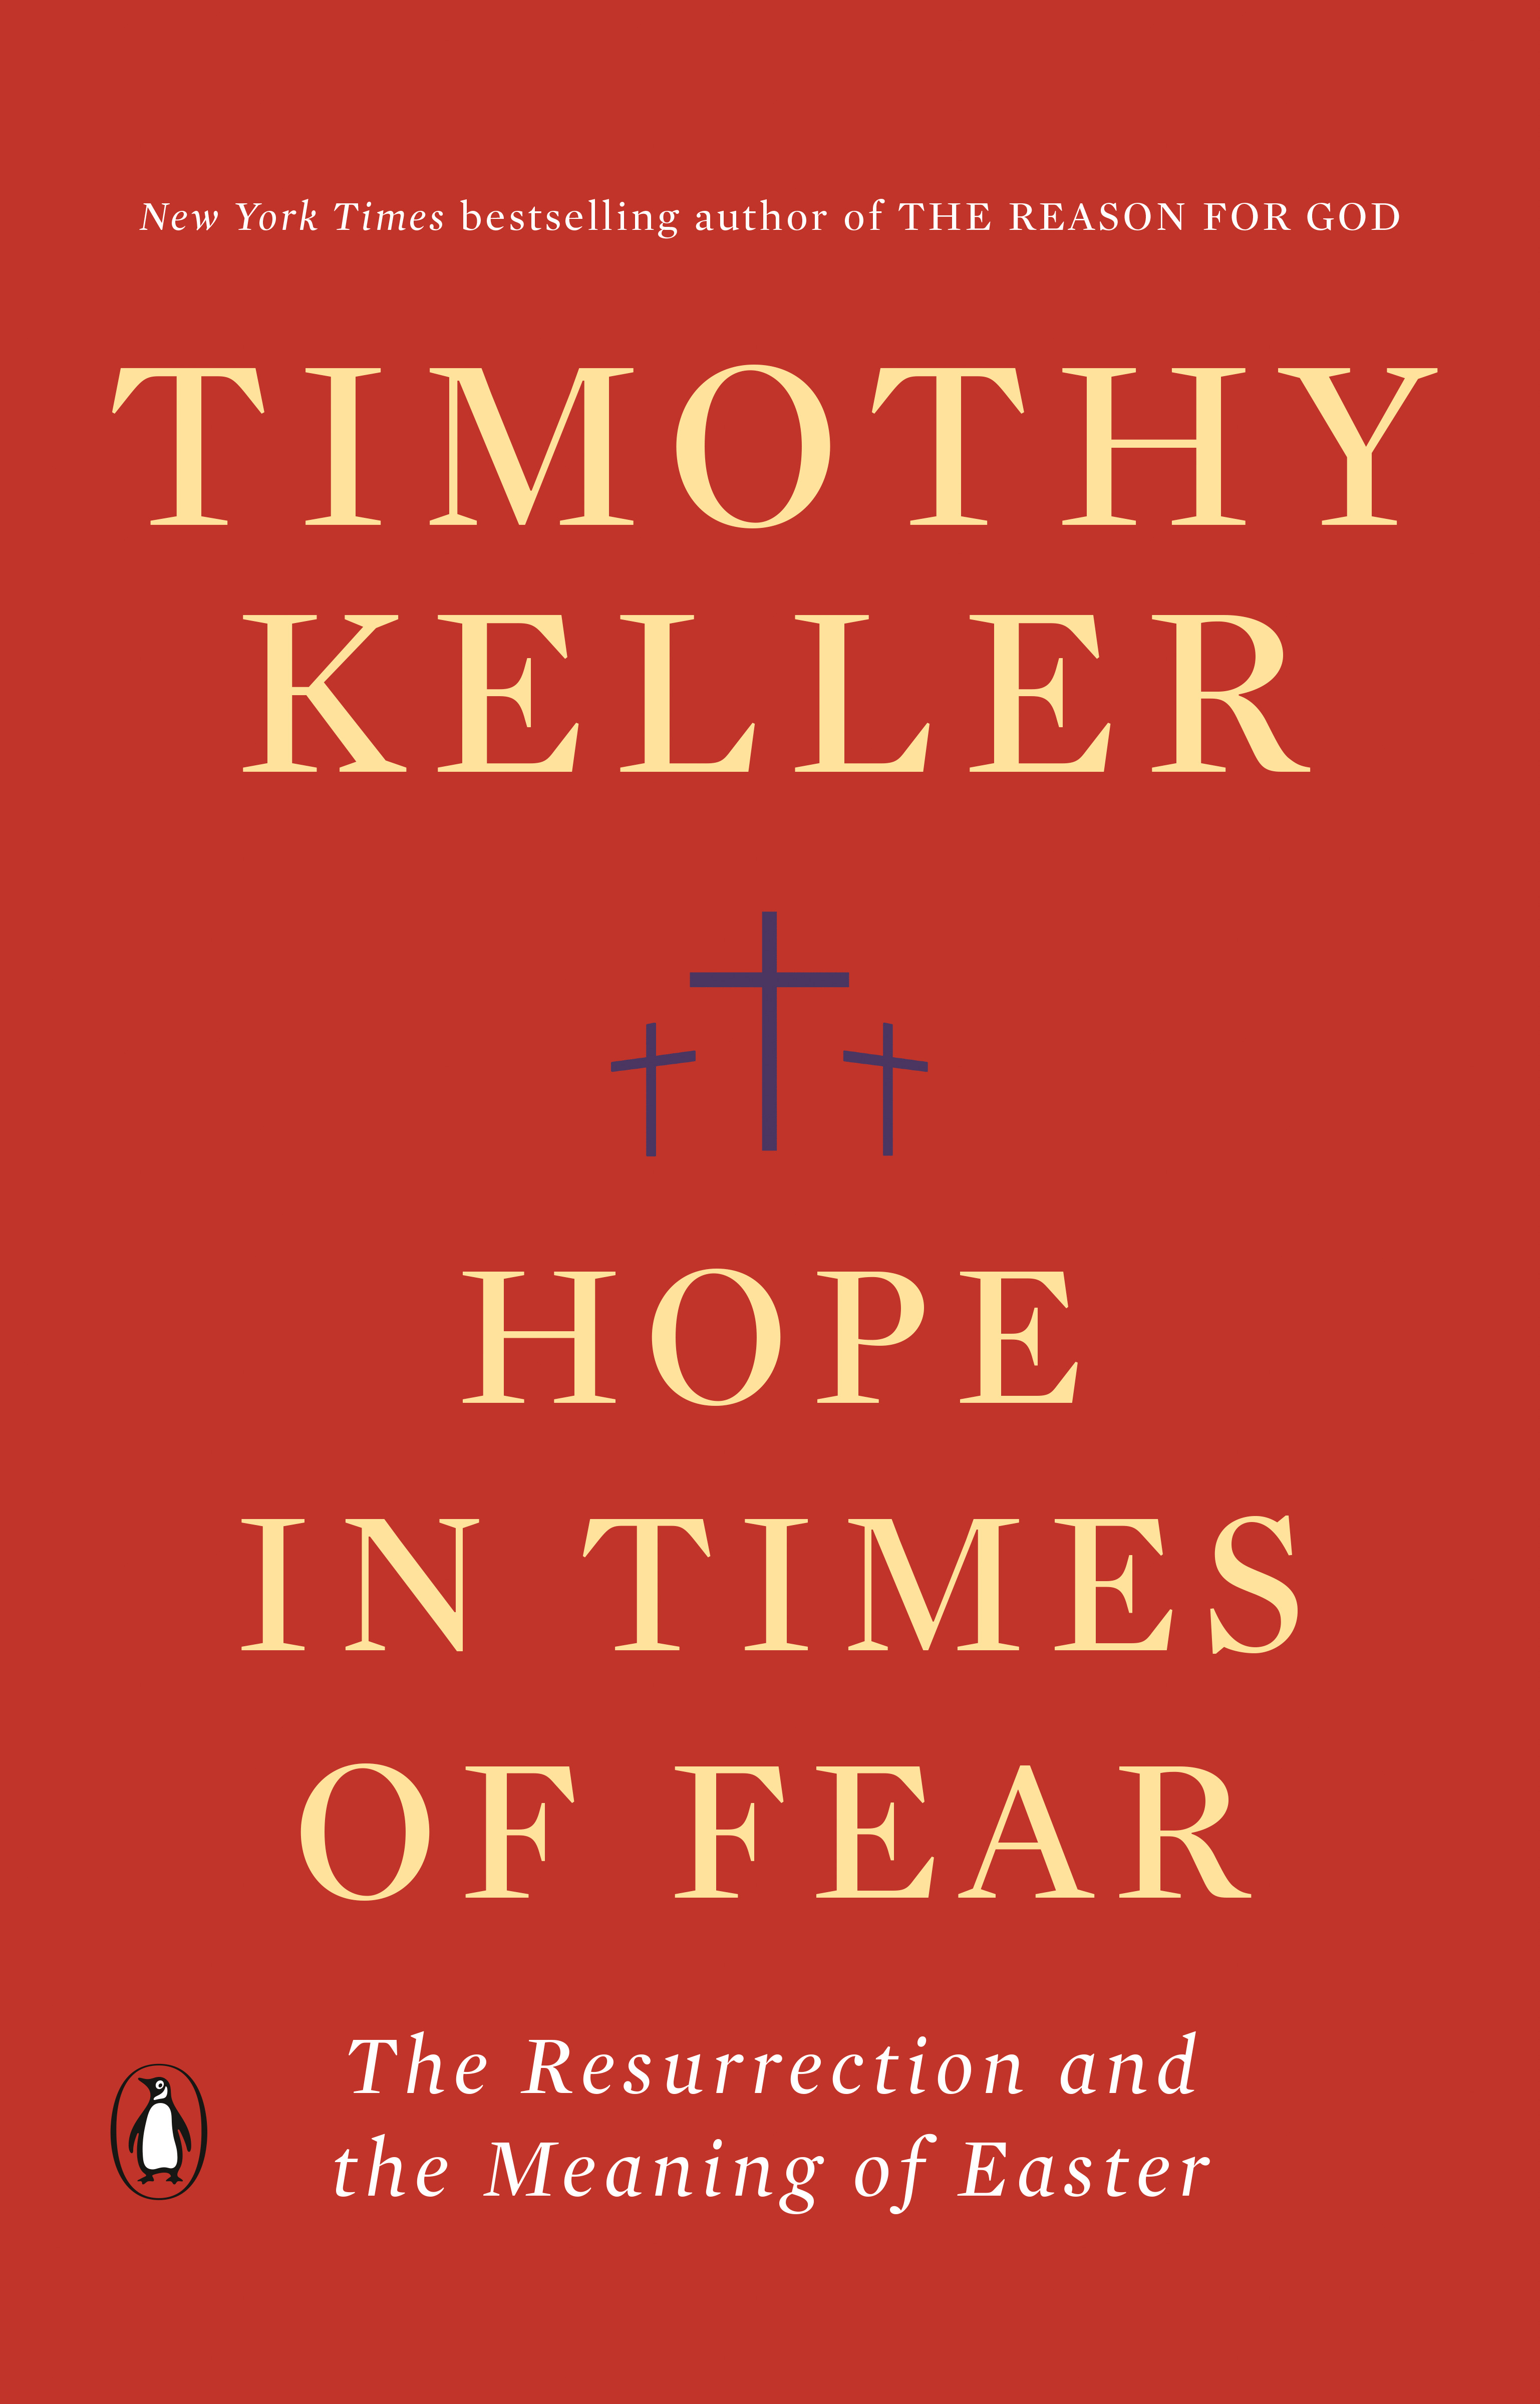 Hope in Times of Fear : The Resurrection and the Meaning of Easter | Keller, Timothy